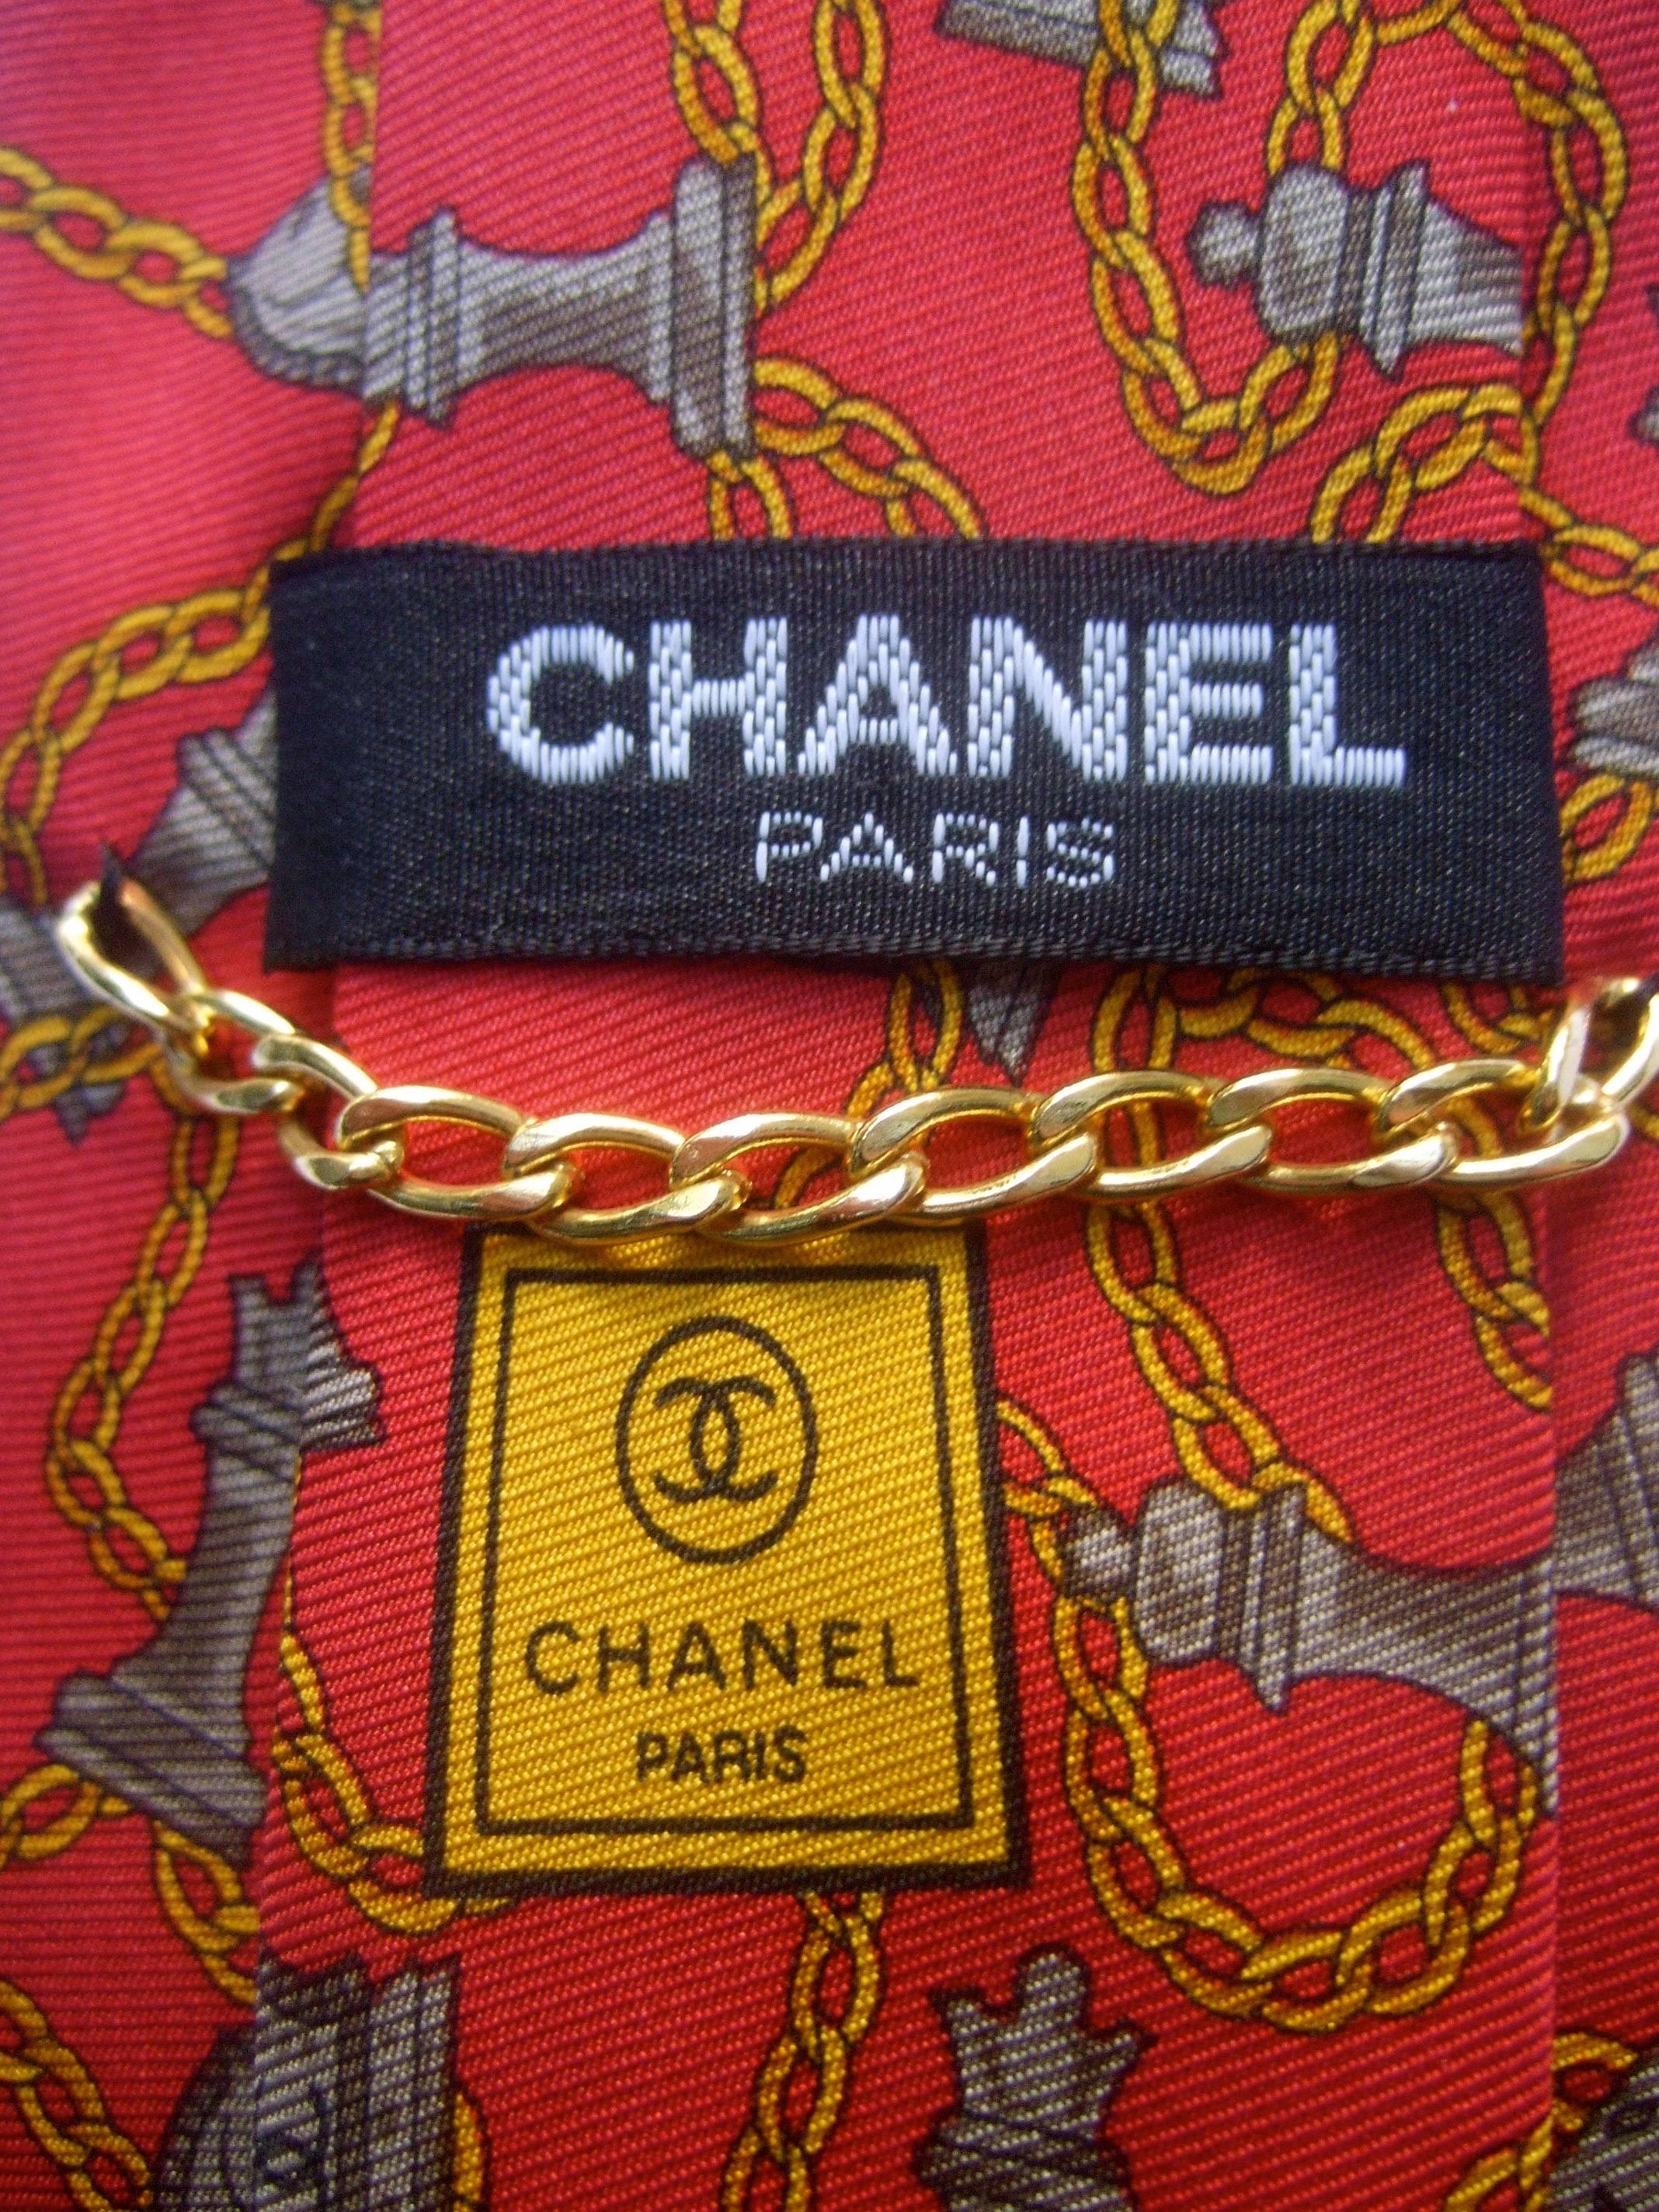 Chanel men's Italian silk chess theme necktie c 1990s
The stylish silk necktie is illustrated with a series 
of chess theme figures connected with sinuous
gold chain graphic

The horse figures have Chanel's C.C. initials 
The chess pieces and gold